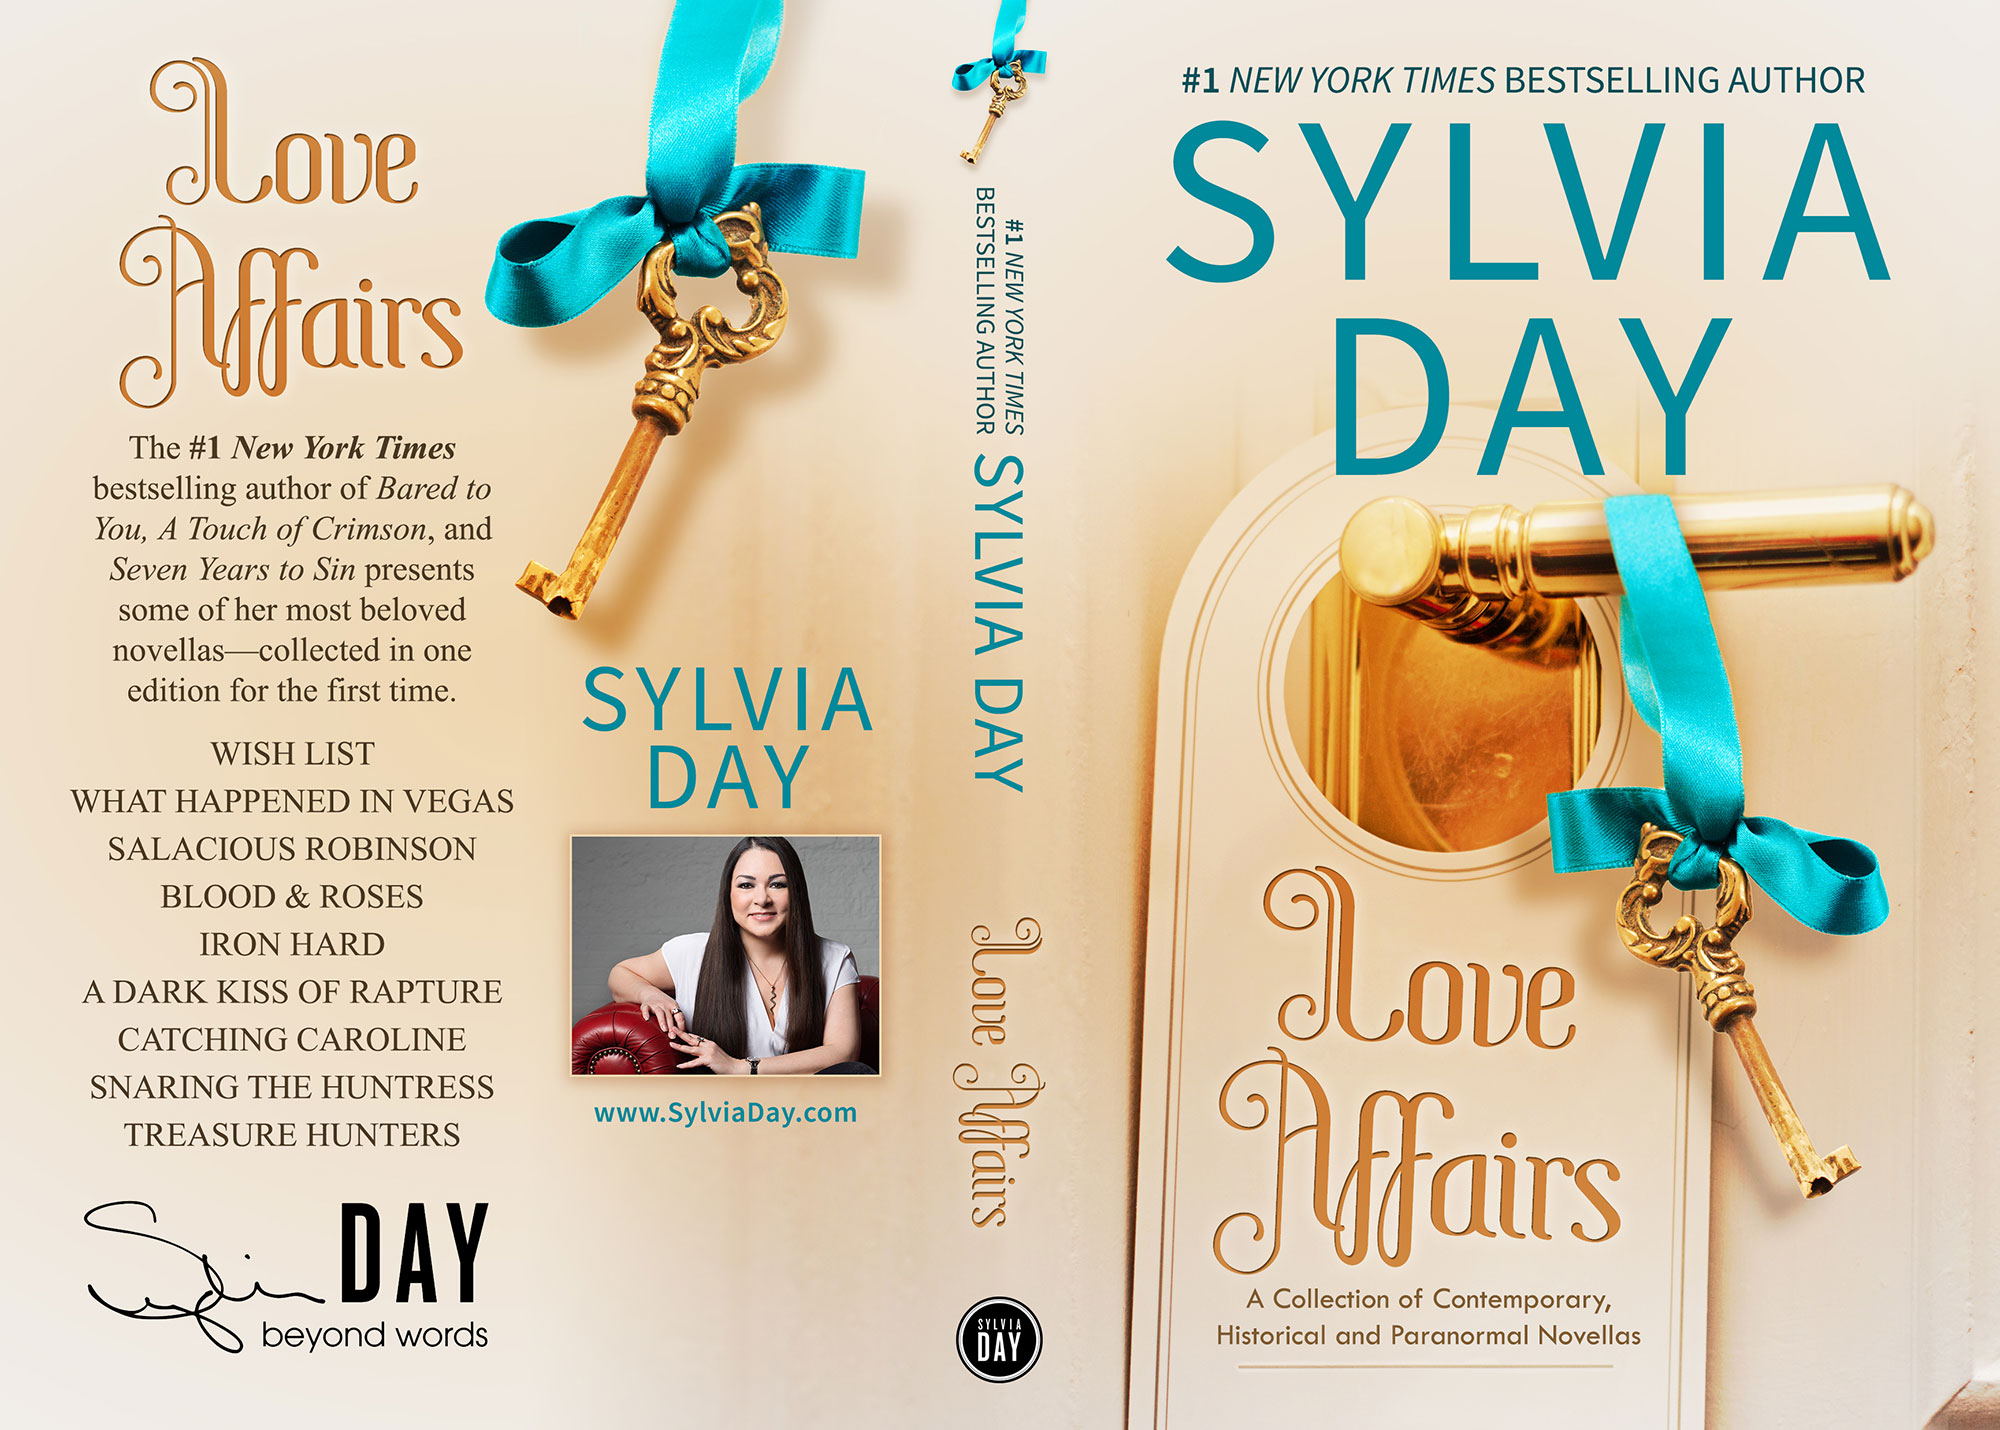 Love Affairs by Sylvia Day (Print Coverflat)